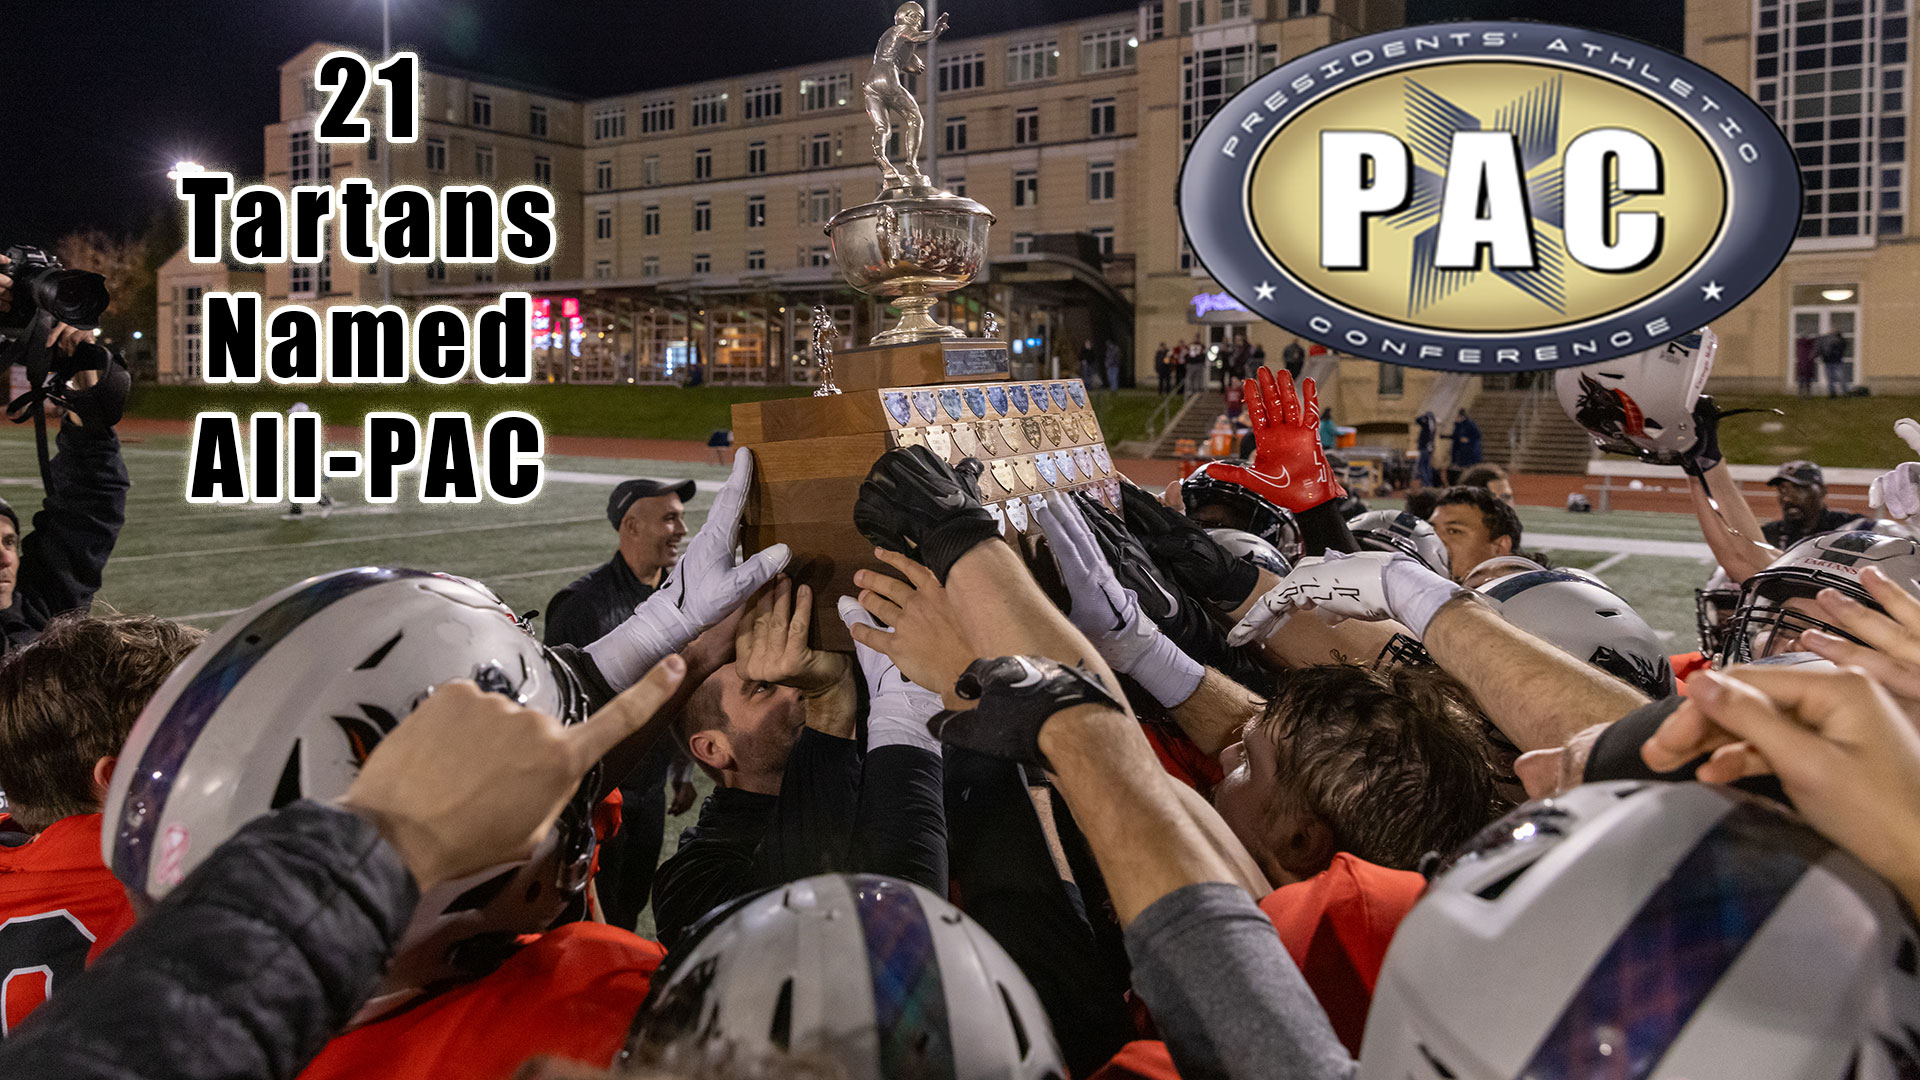 Football Places 21 on All-PAC Team